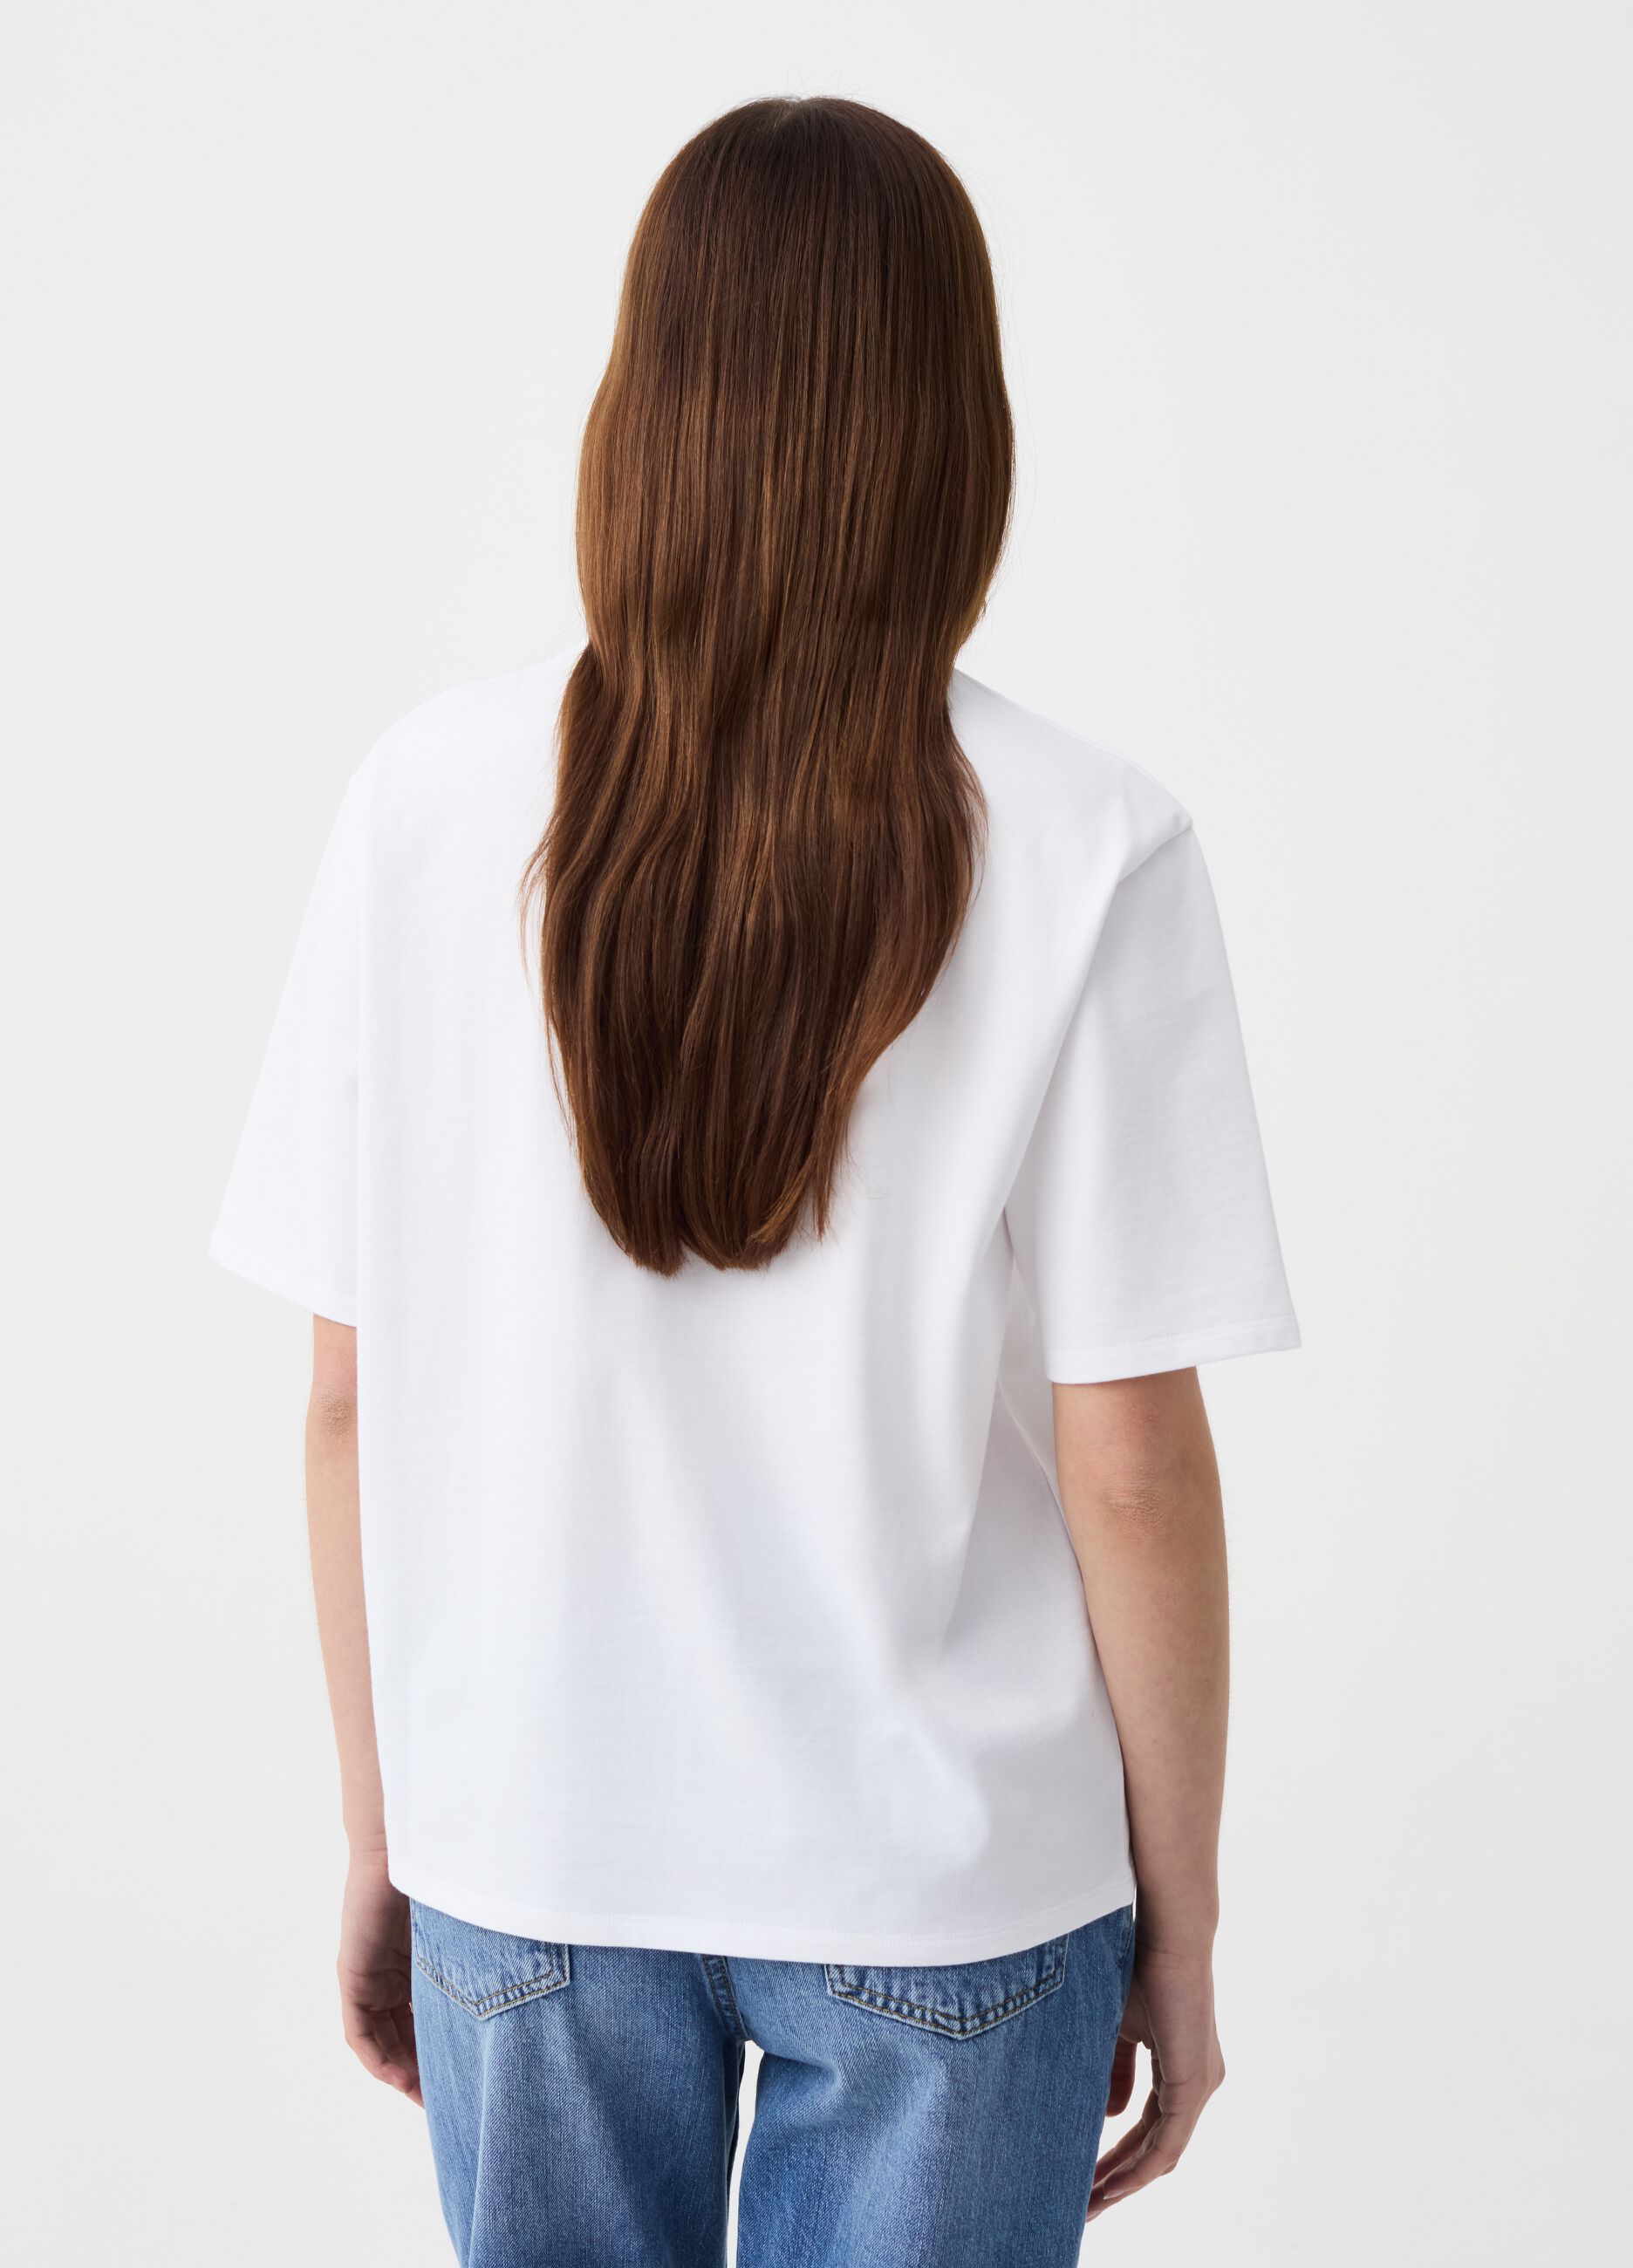 T-shirt with round neck and cut-out details